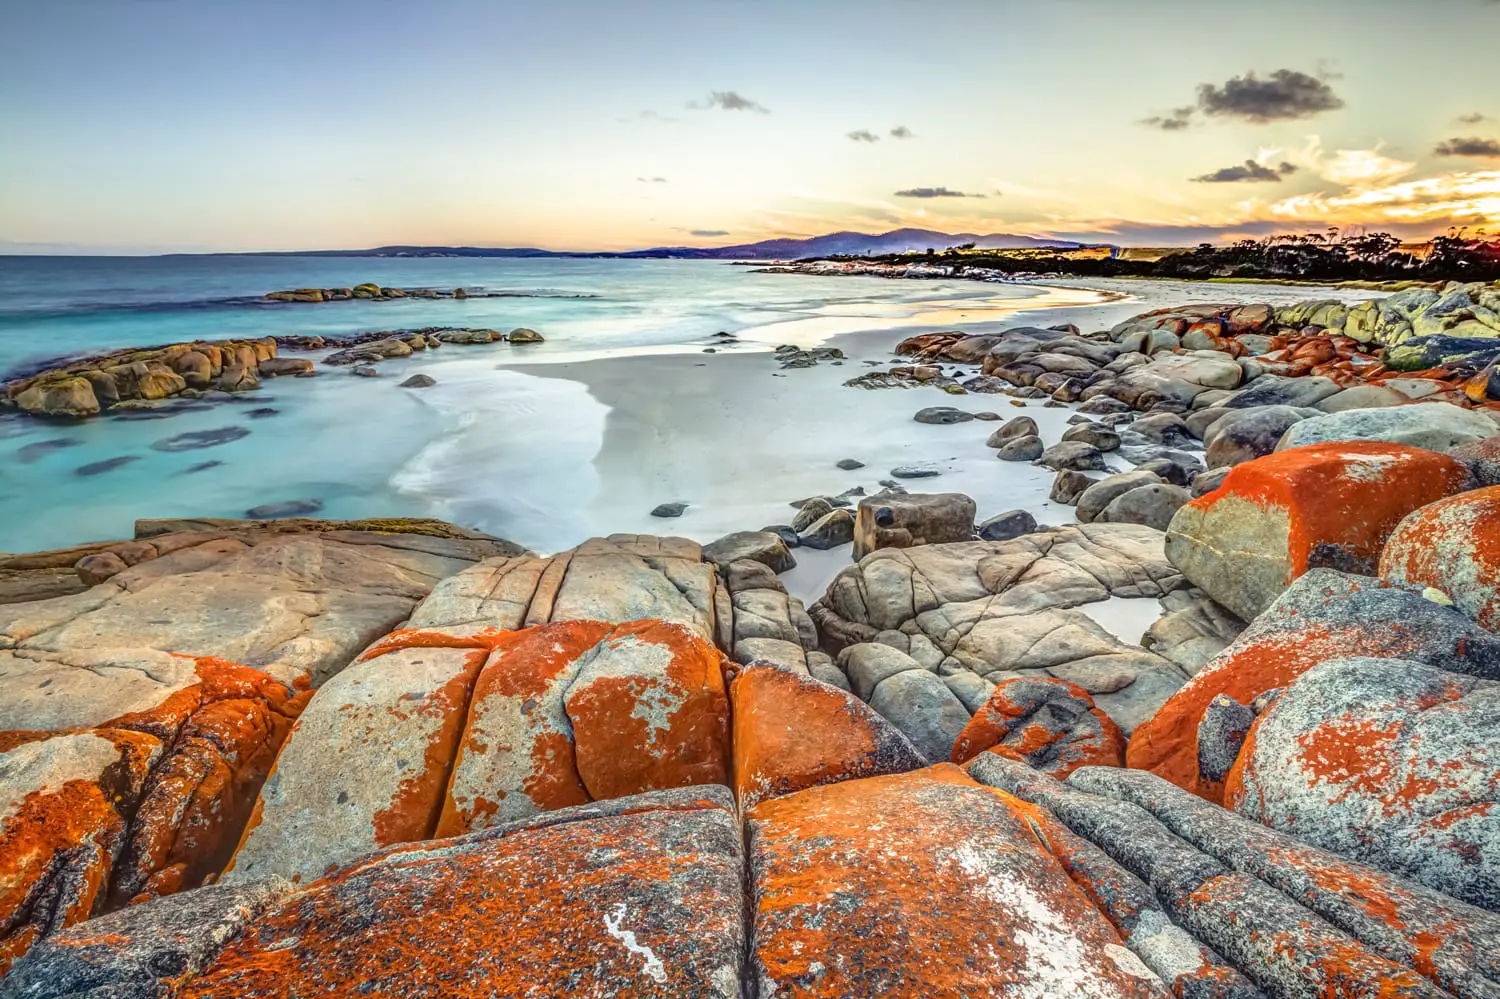 Drammatic landscape in The Gardens, Bay of Fires consevation Area ranging from Binalong Bay to Eddystone Point, east coast of Tasmania in Australia.